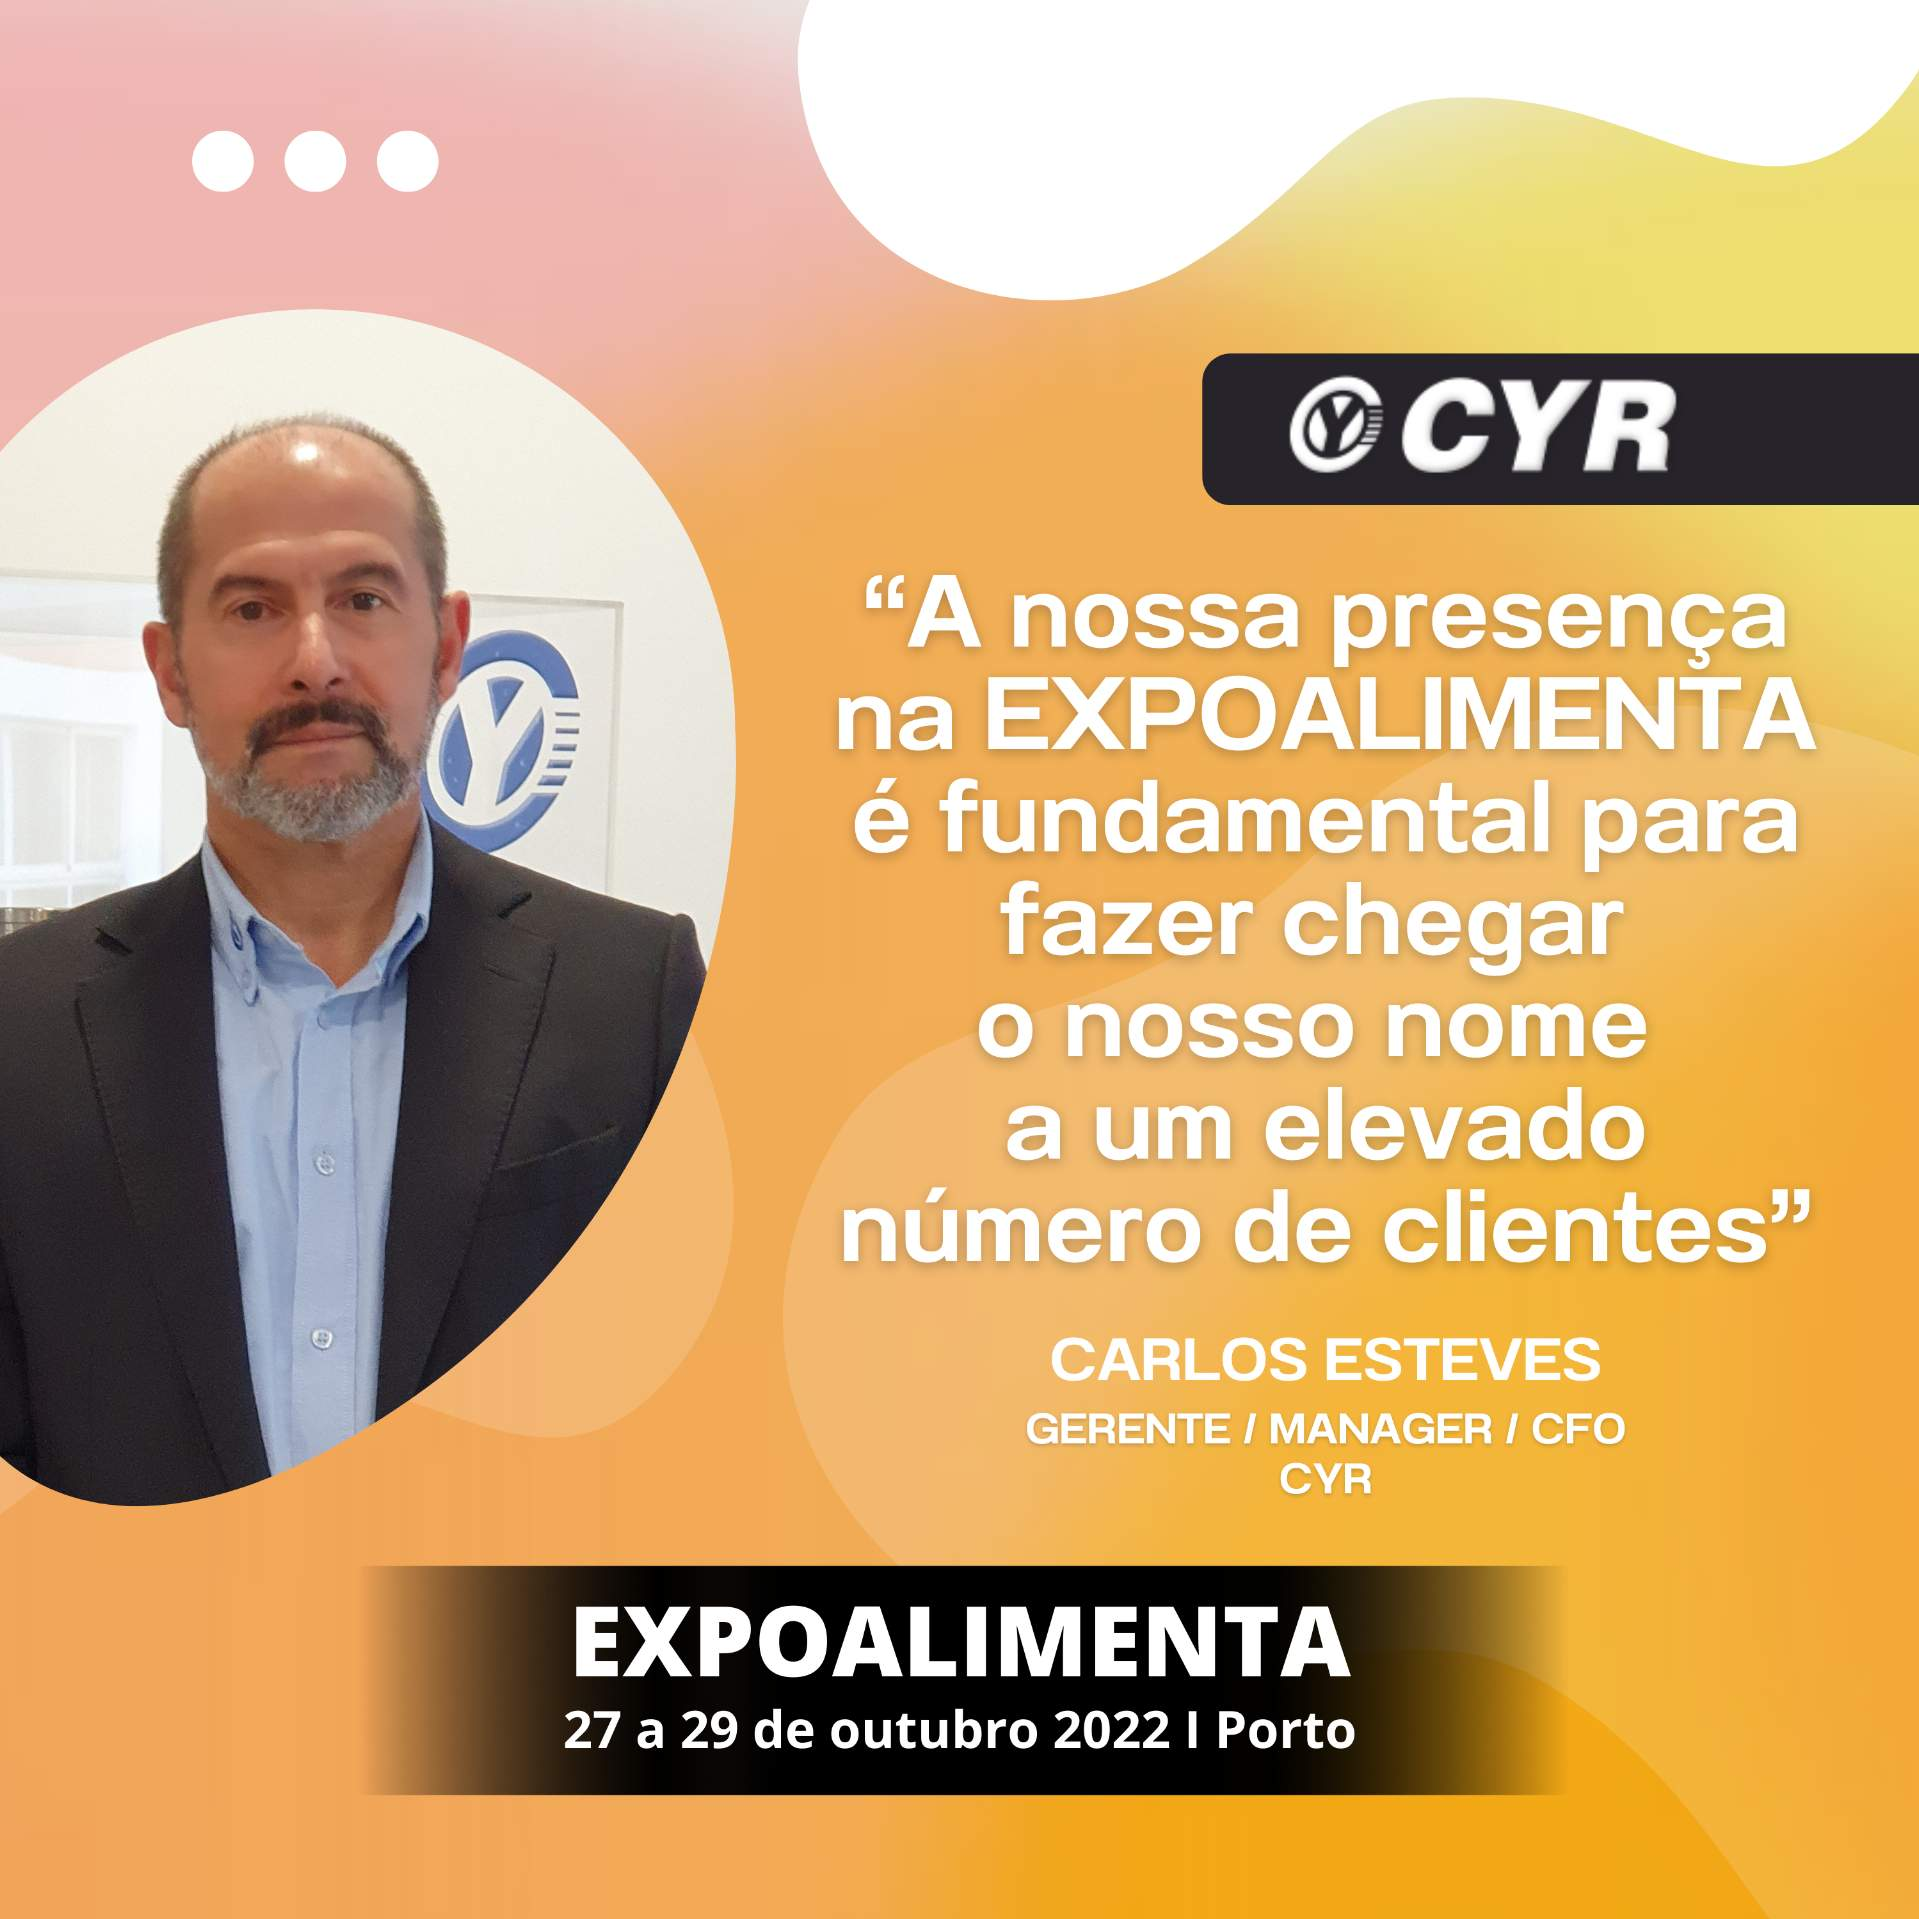 CYR: "Our participation at EXPOALIMENTA is vital to make our name known to a large number of clients".